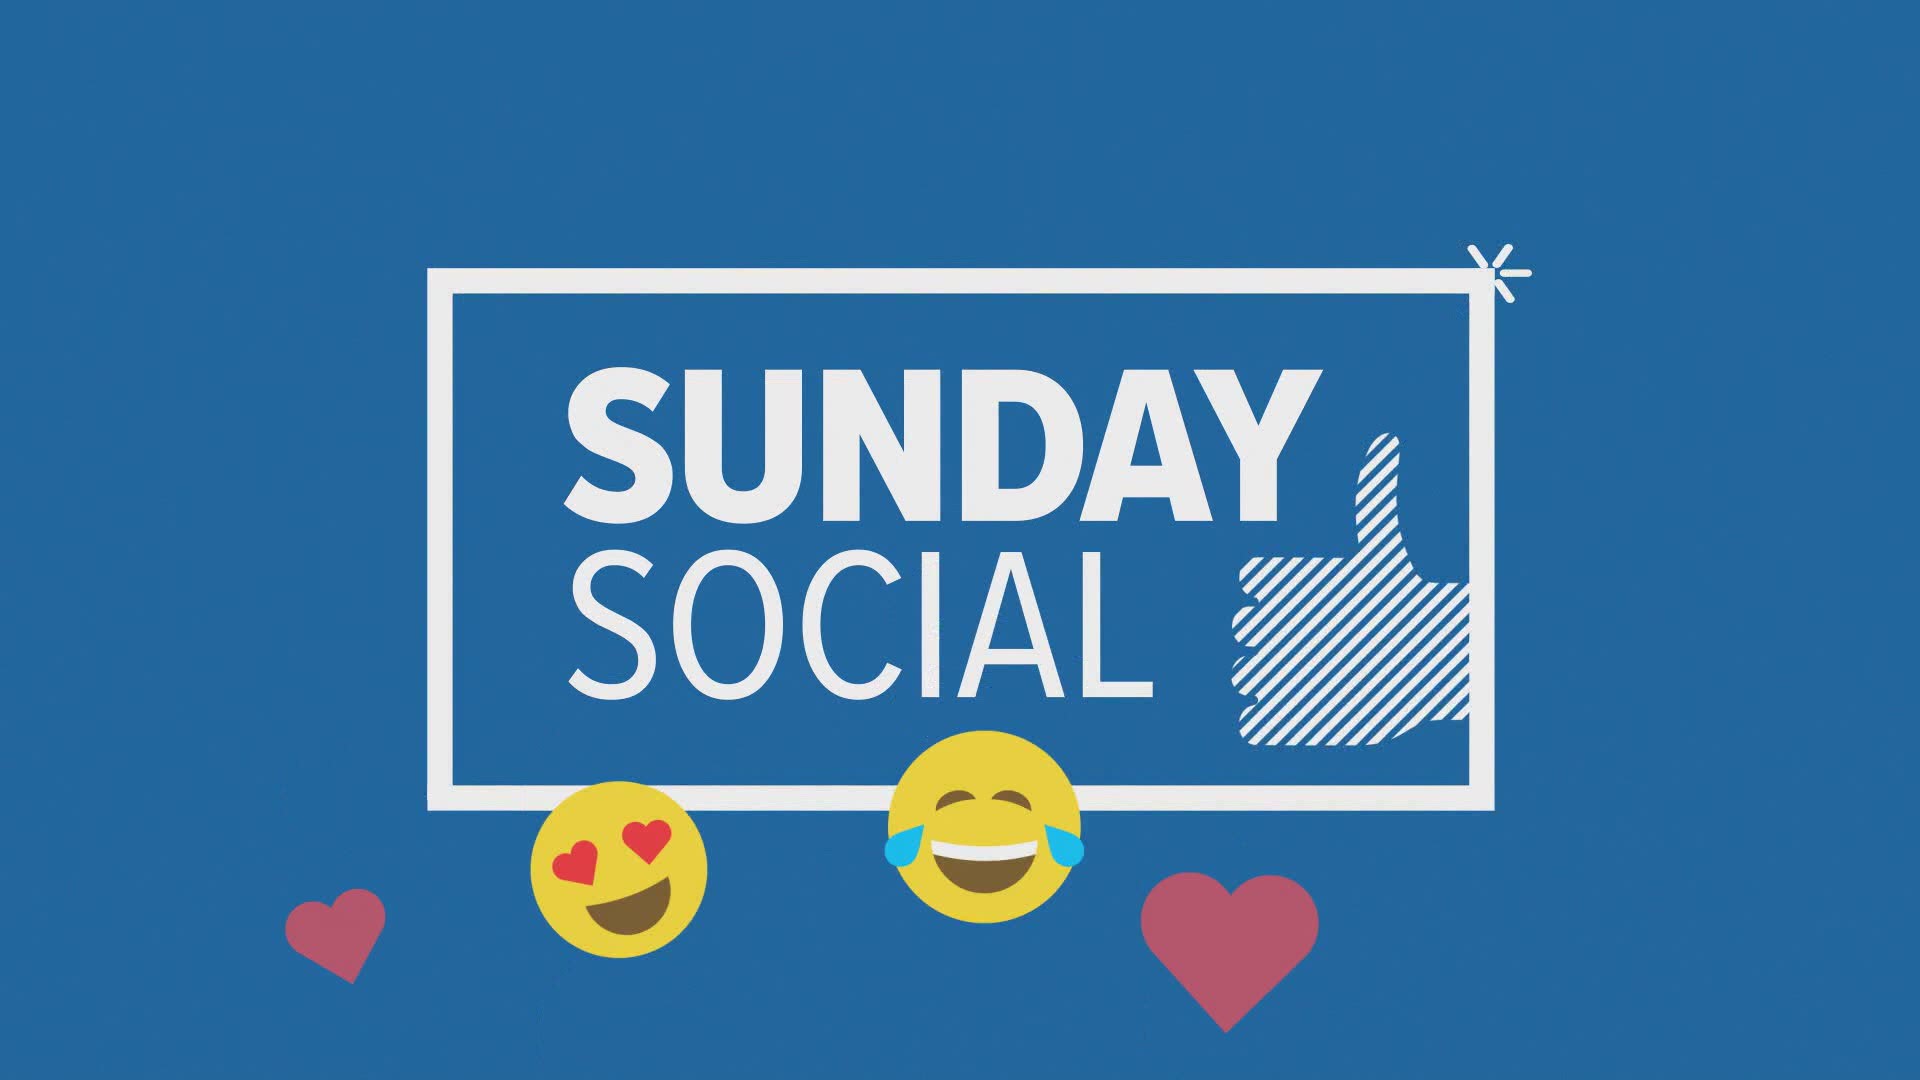 Cory Froomkin, Jessica Gagne, and Clay Gordon pick their favorite social media posts of the week. Sunday Social airs weekends on The Morning Report